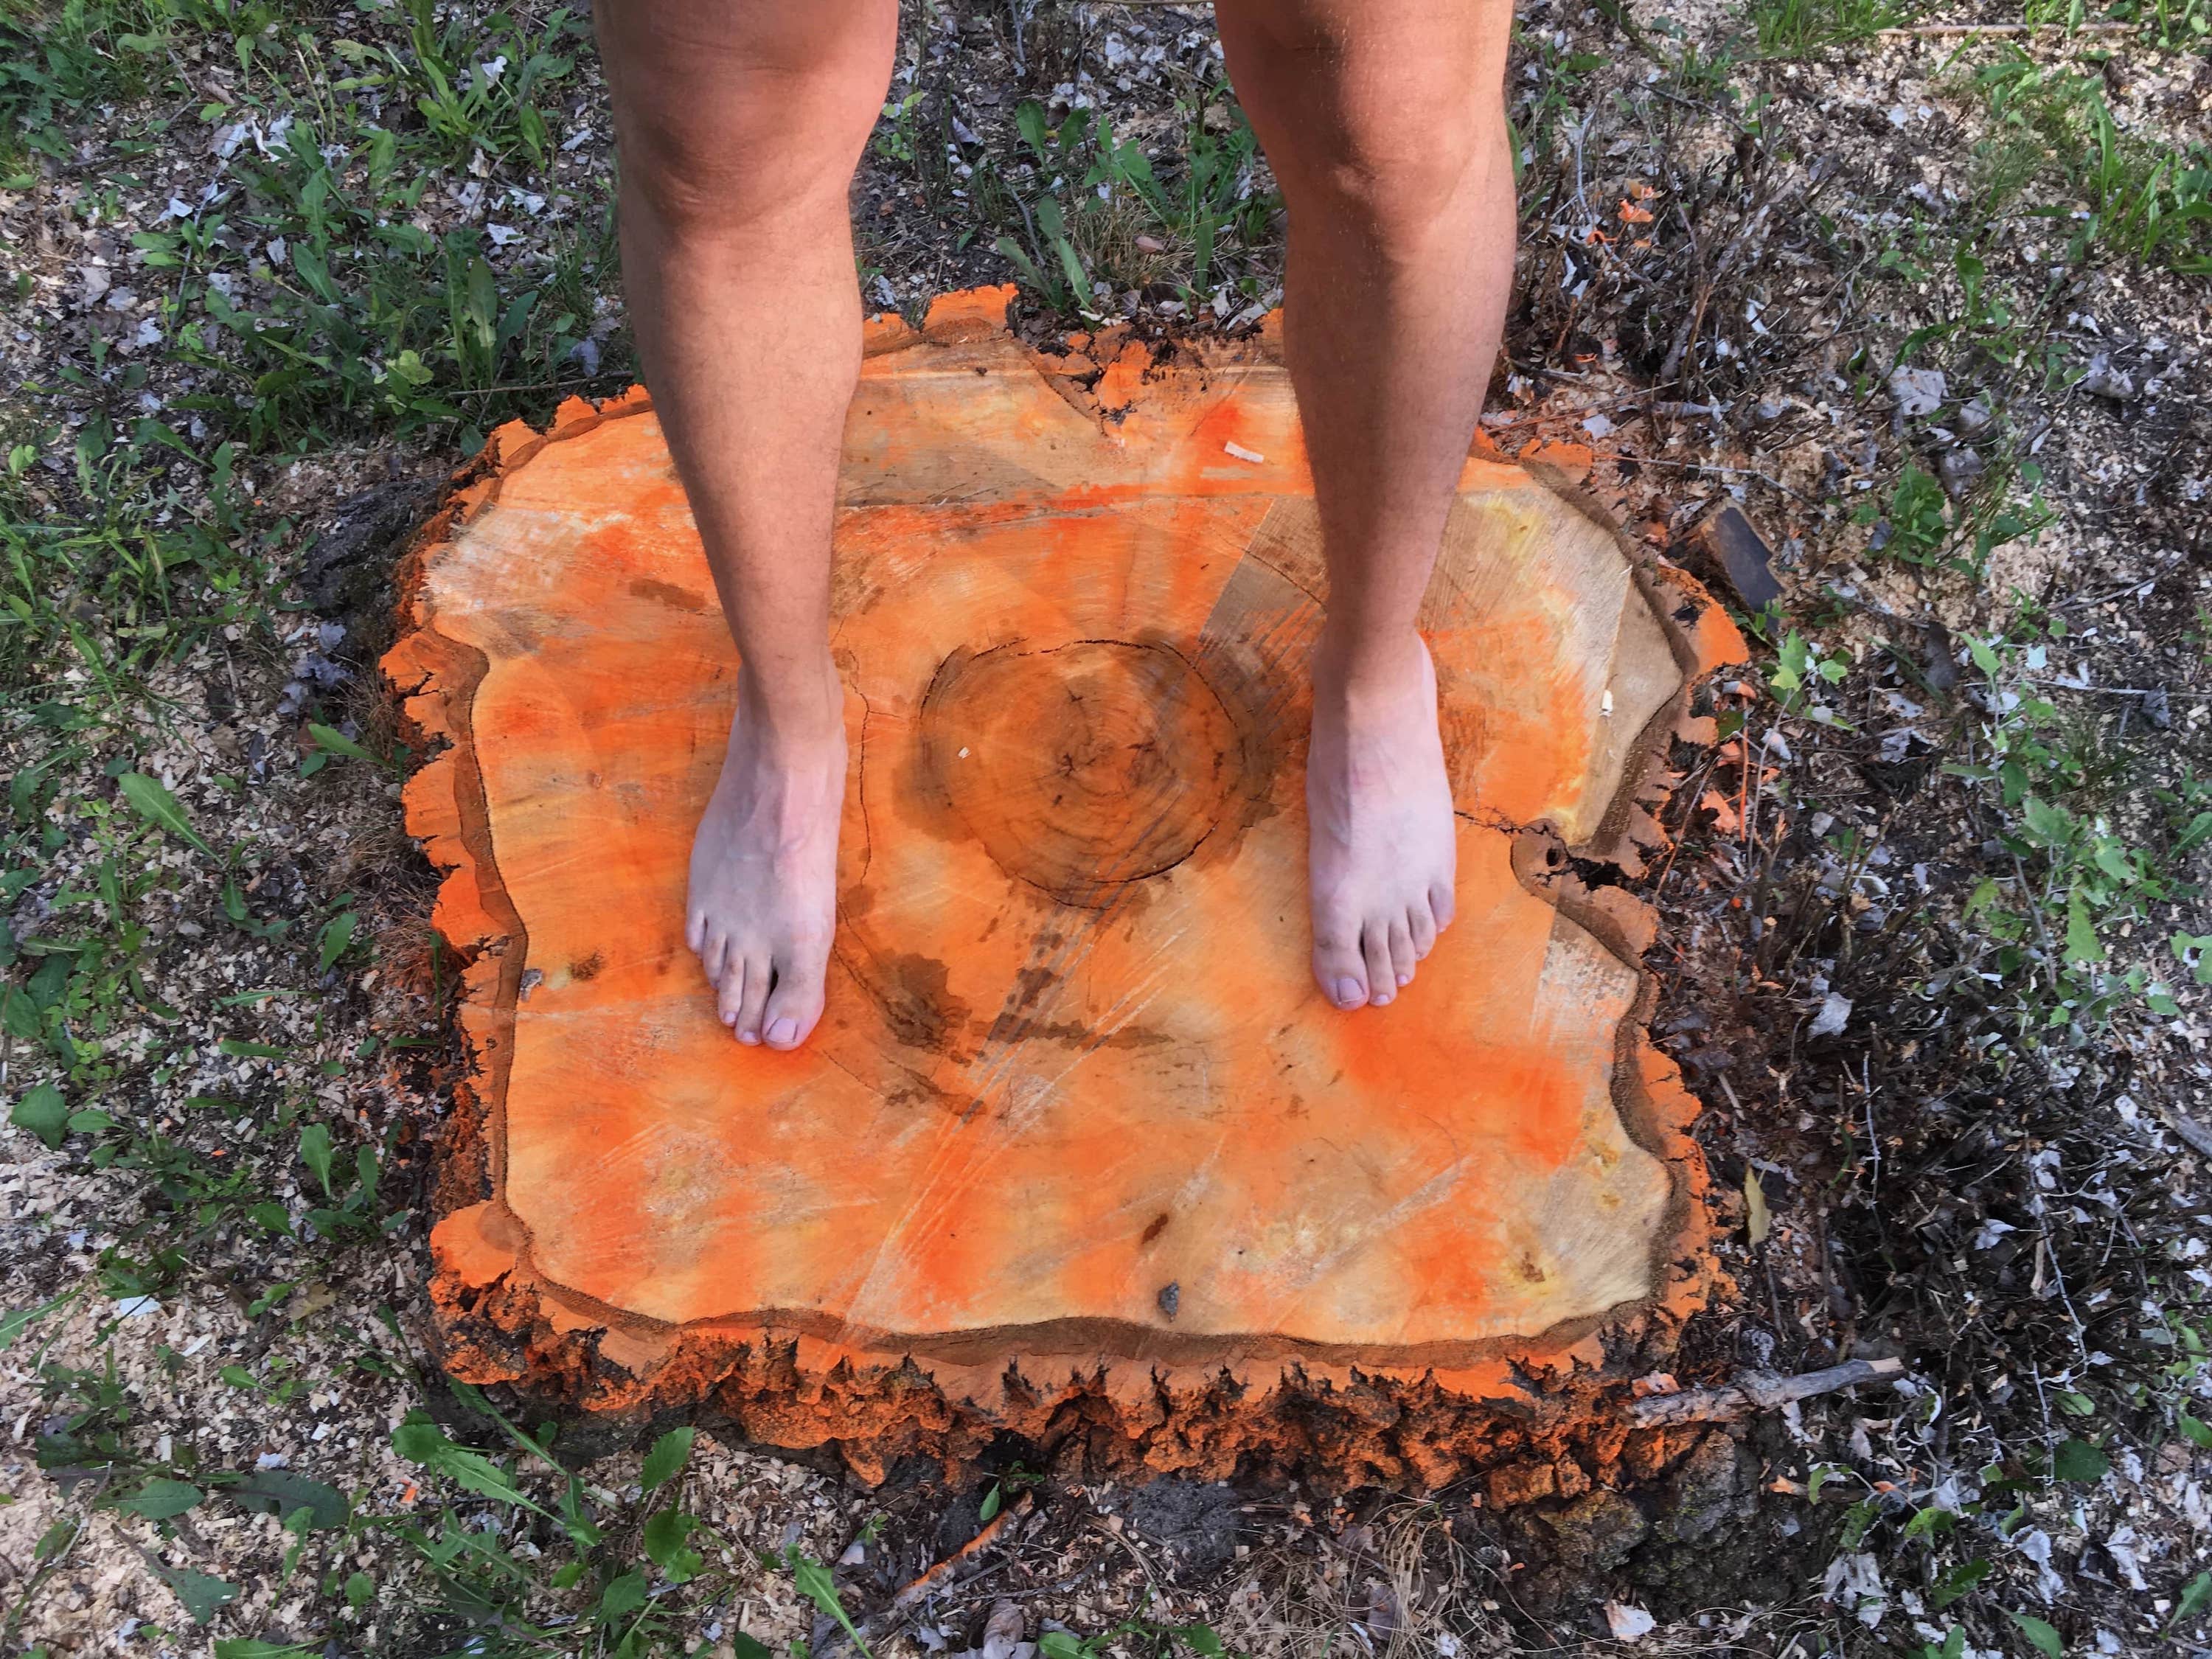 A person standing on a tree stump spray painted with orange.